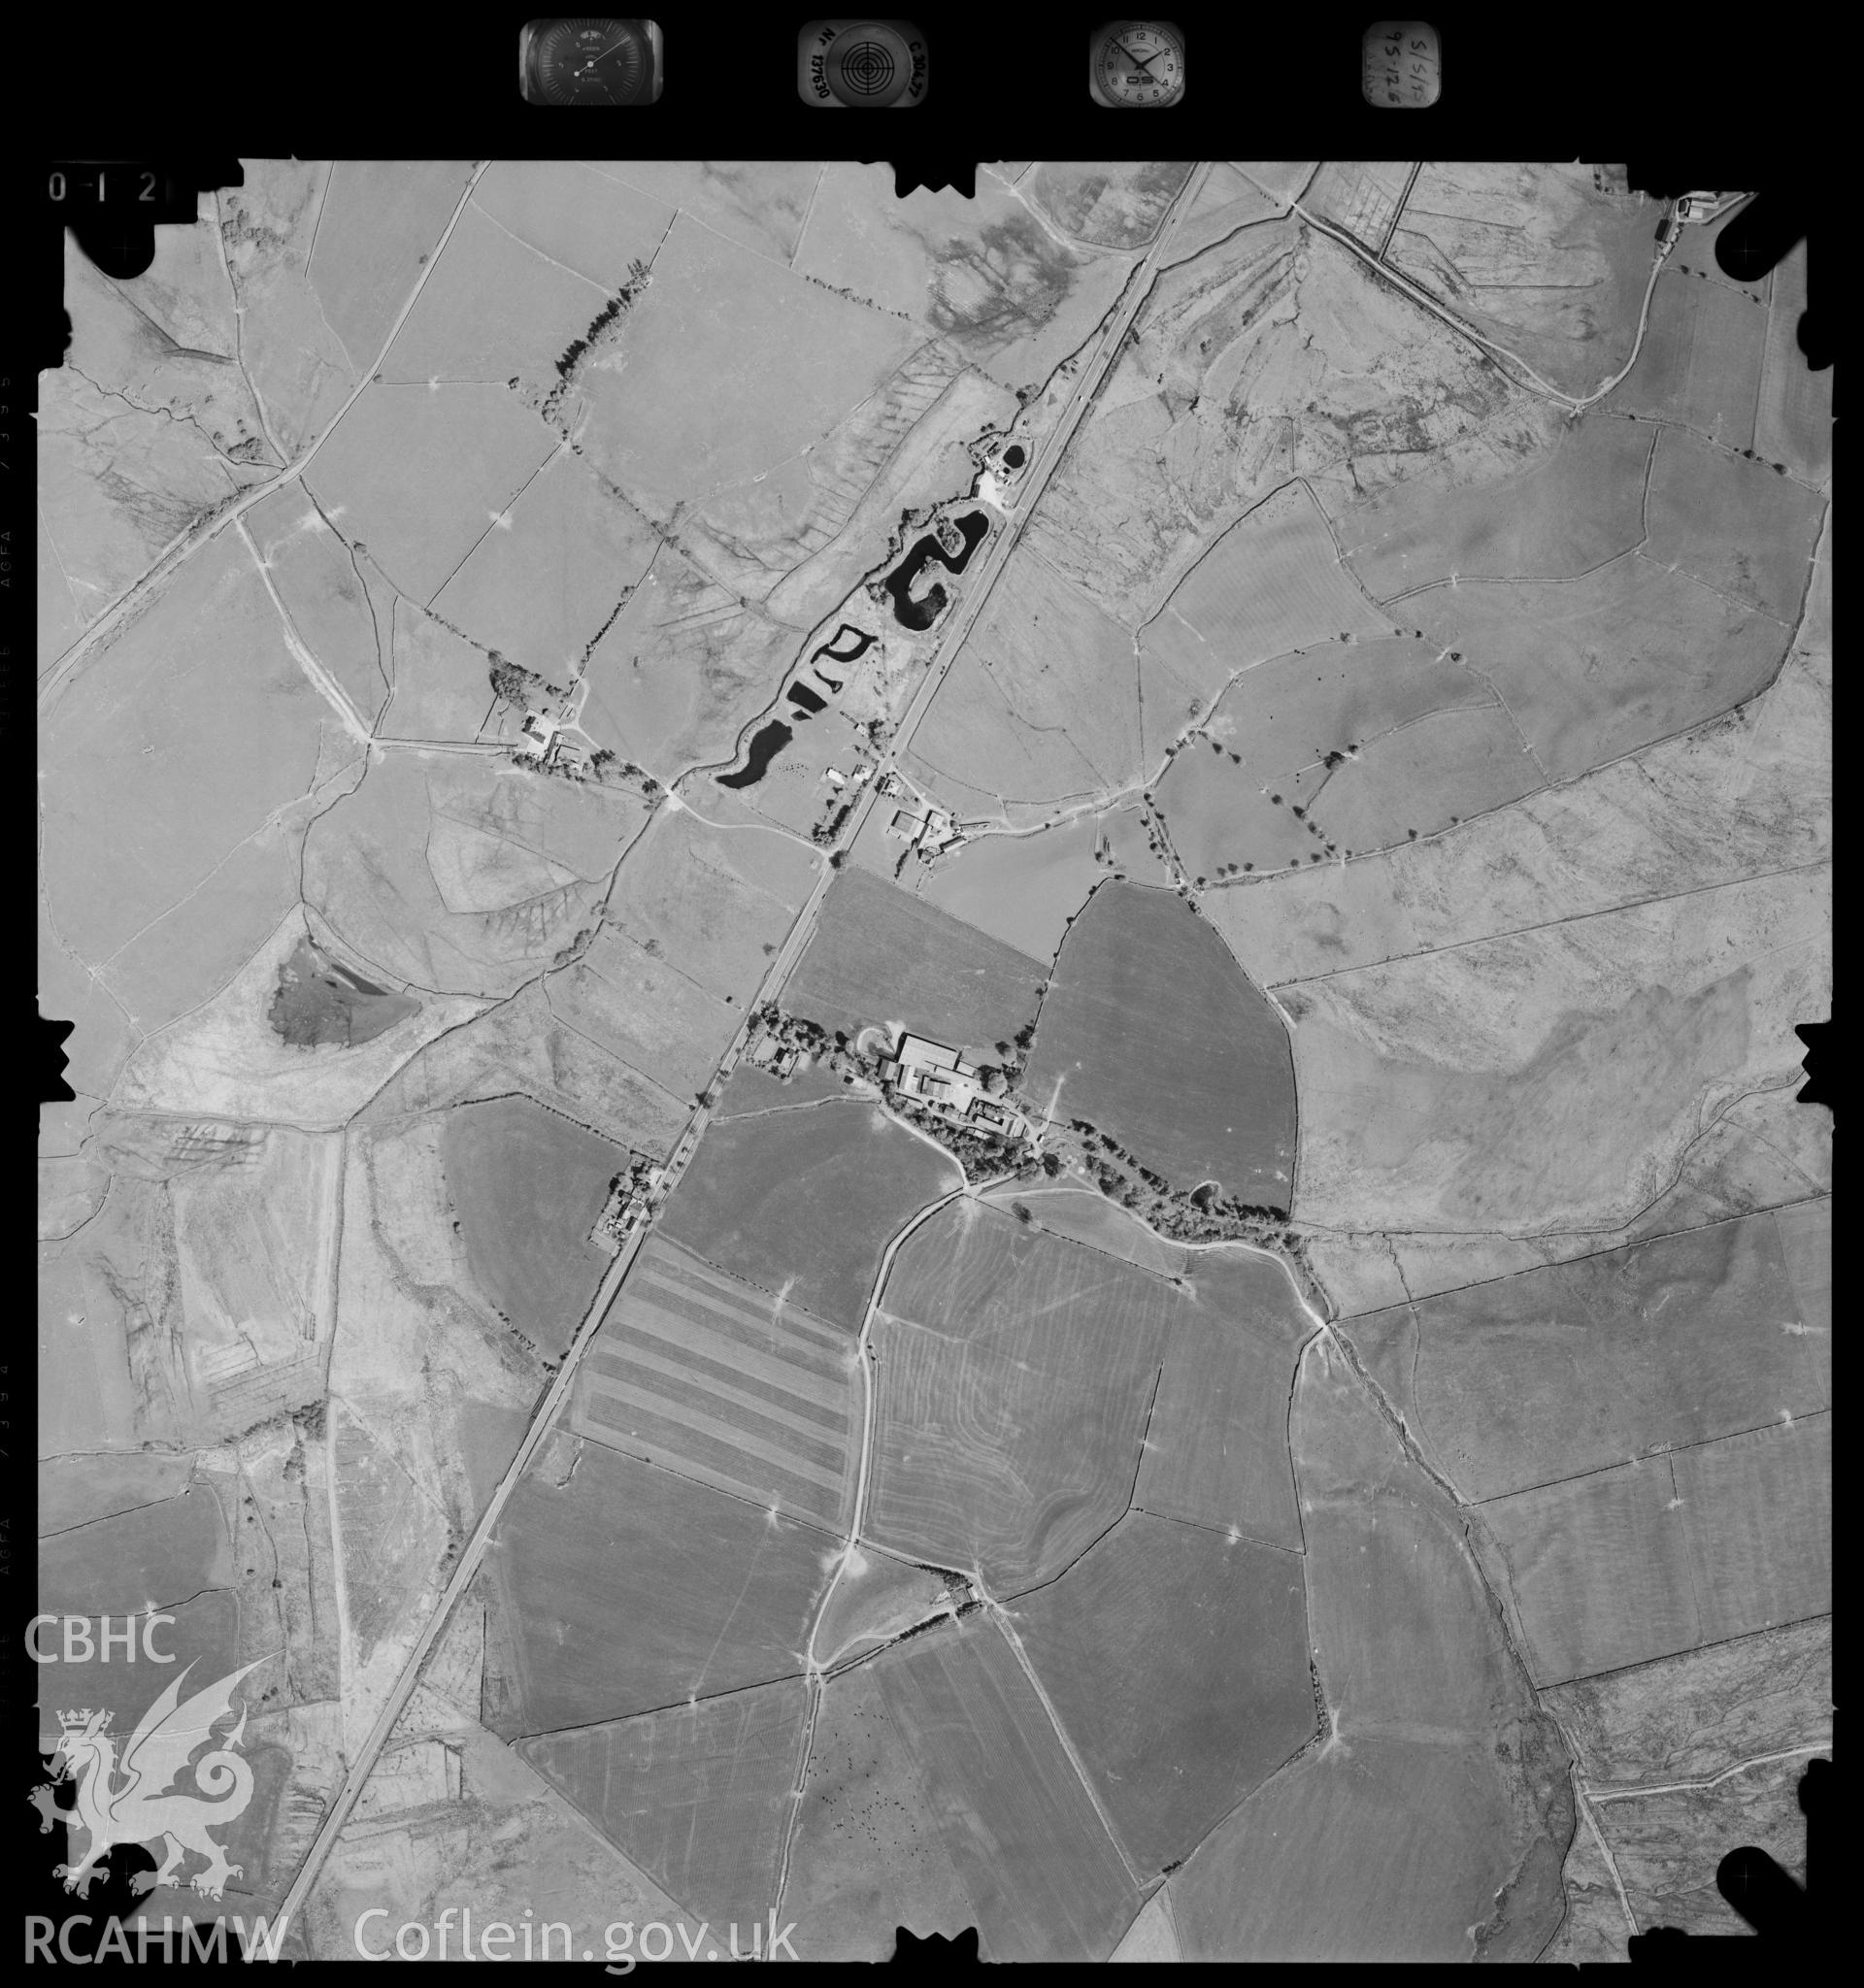 Digitized copy of an aerial photograph showing an area to the north-west of Cerrig y Drudion, taken by Ordnance Survey, 1995.